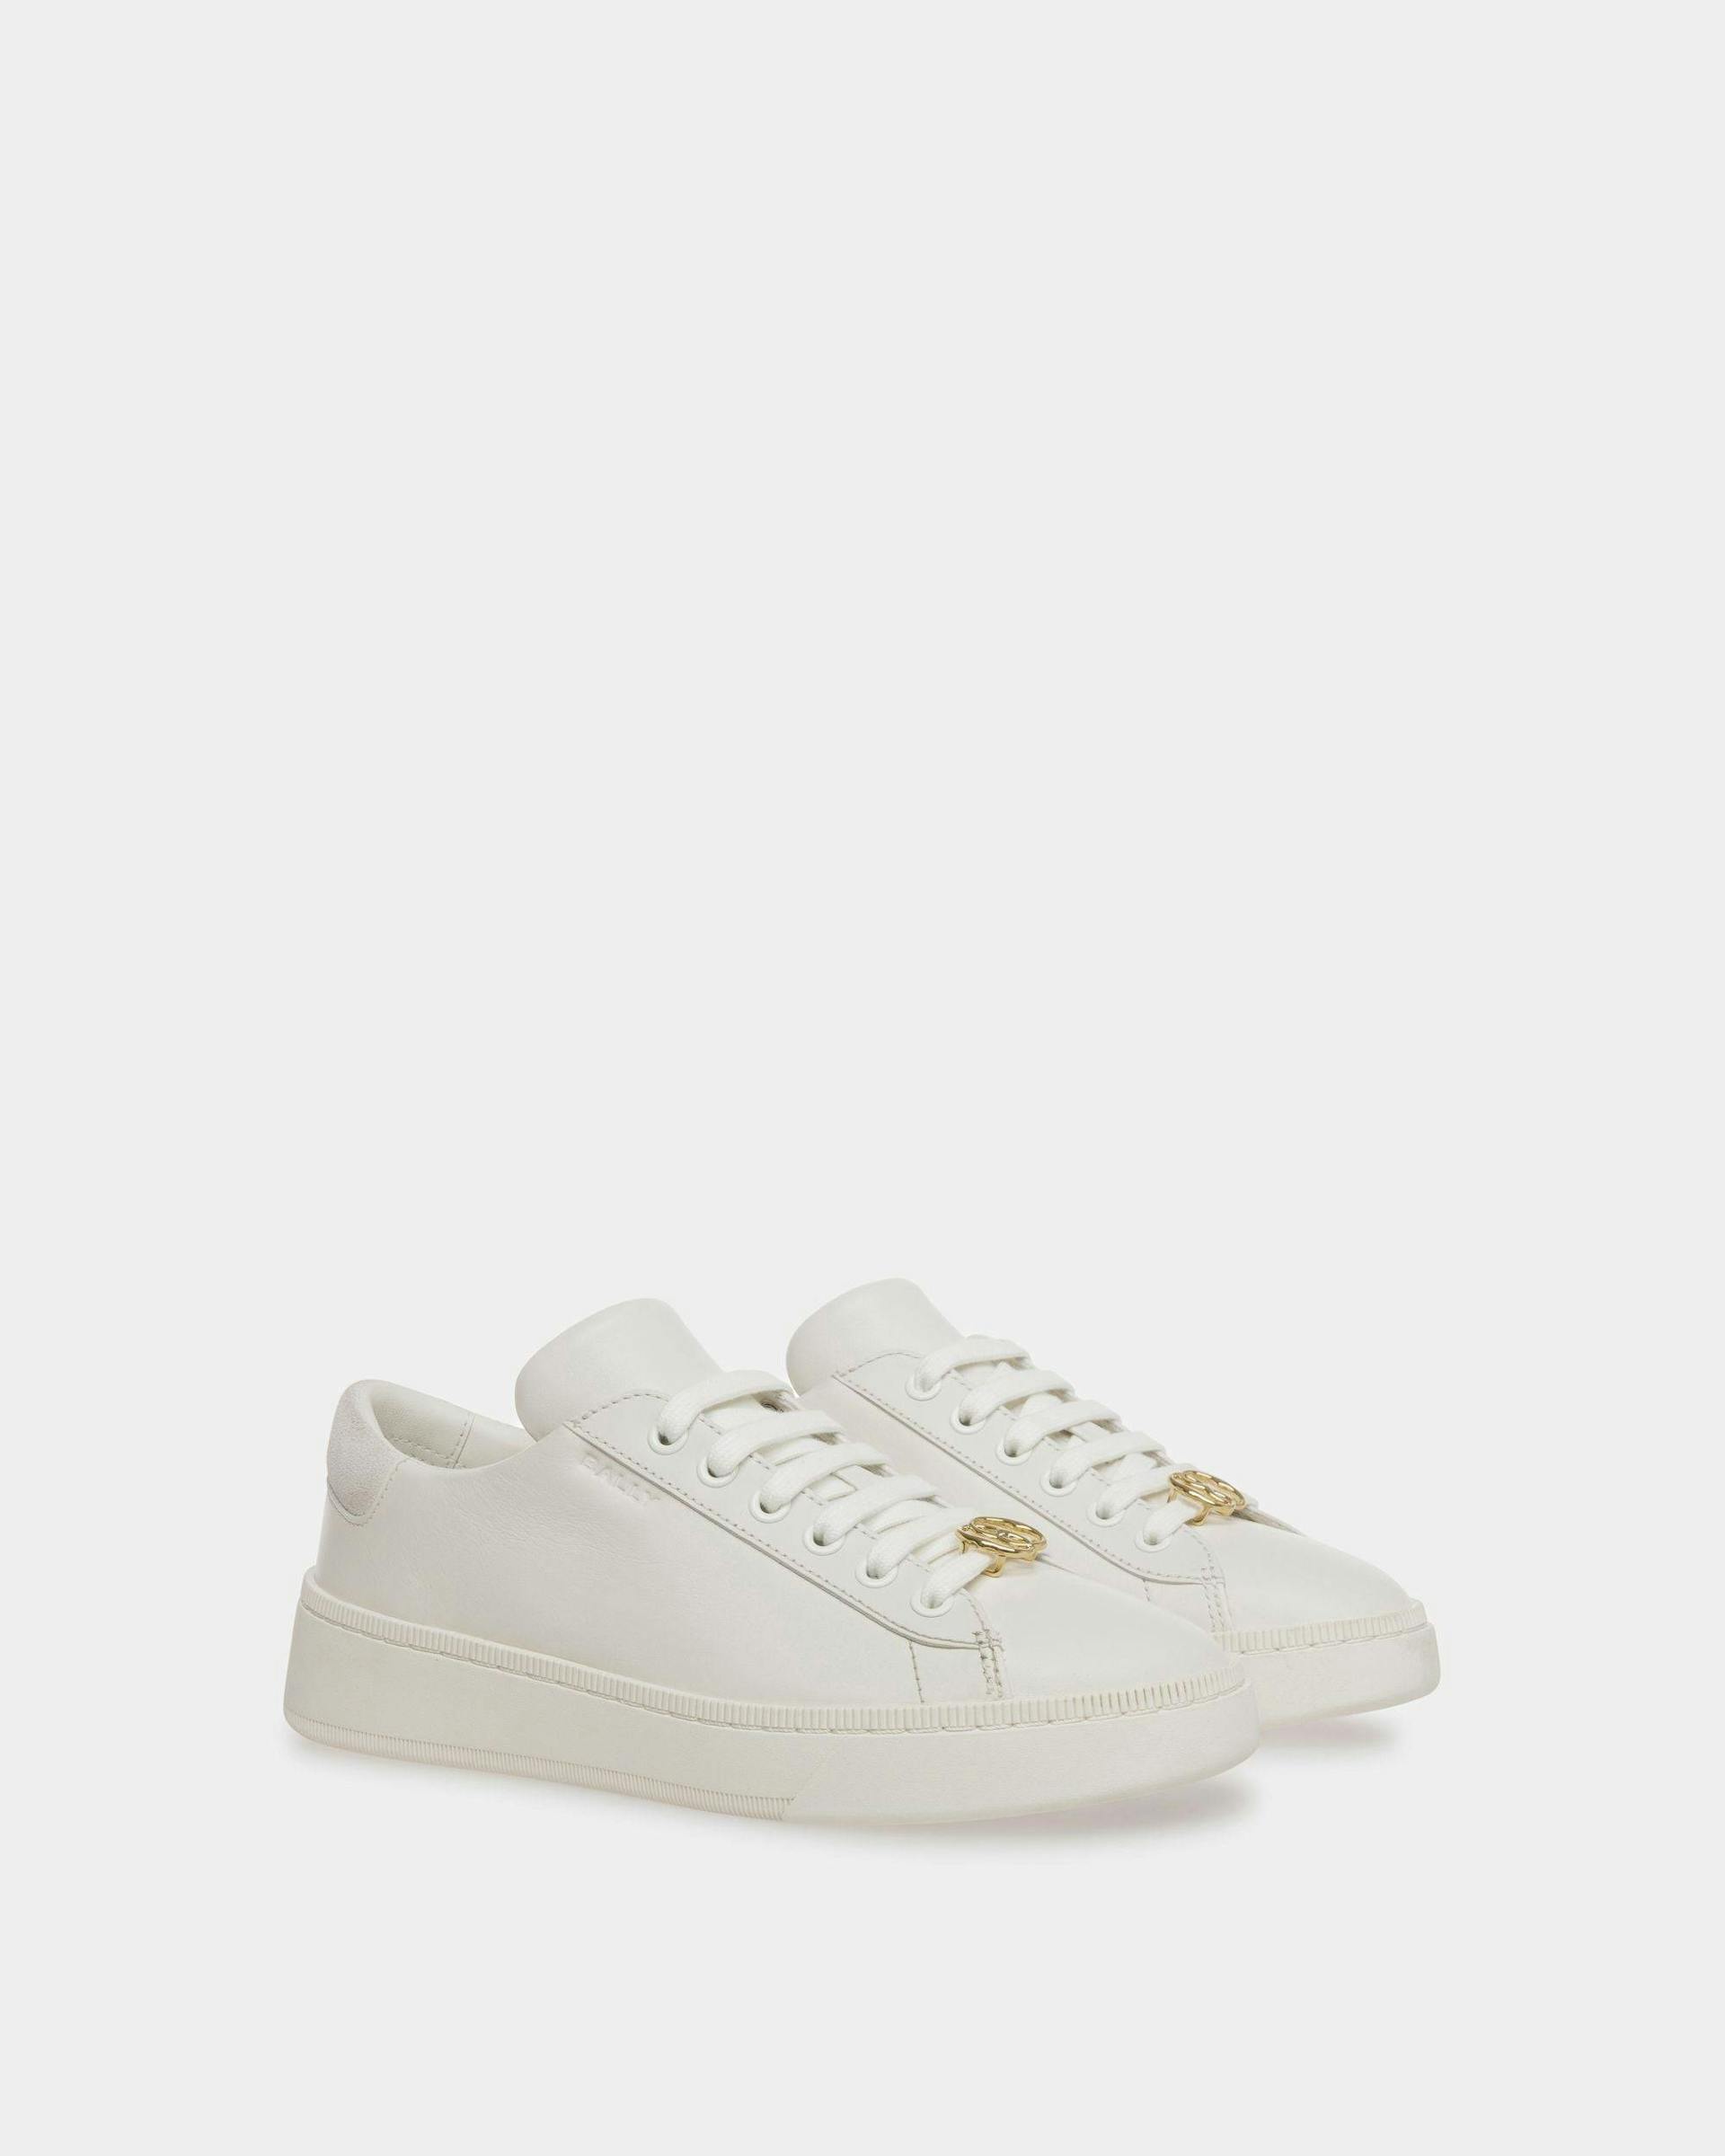 Raise Sneakers In White Leather - Women's - Bally - 03